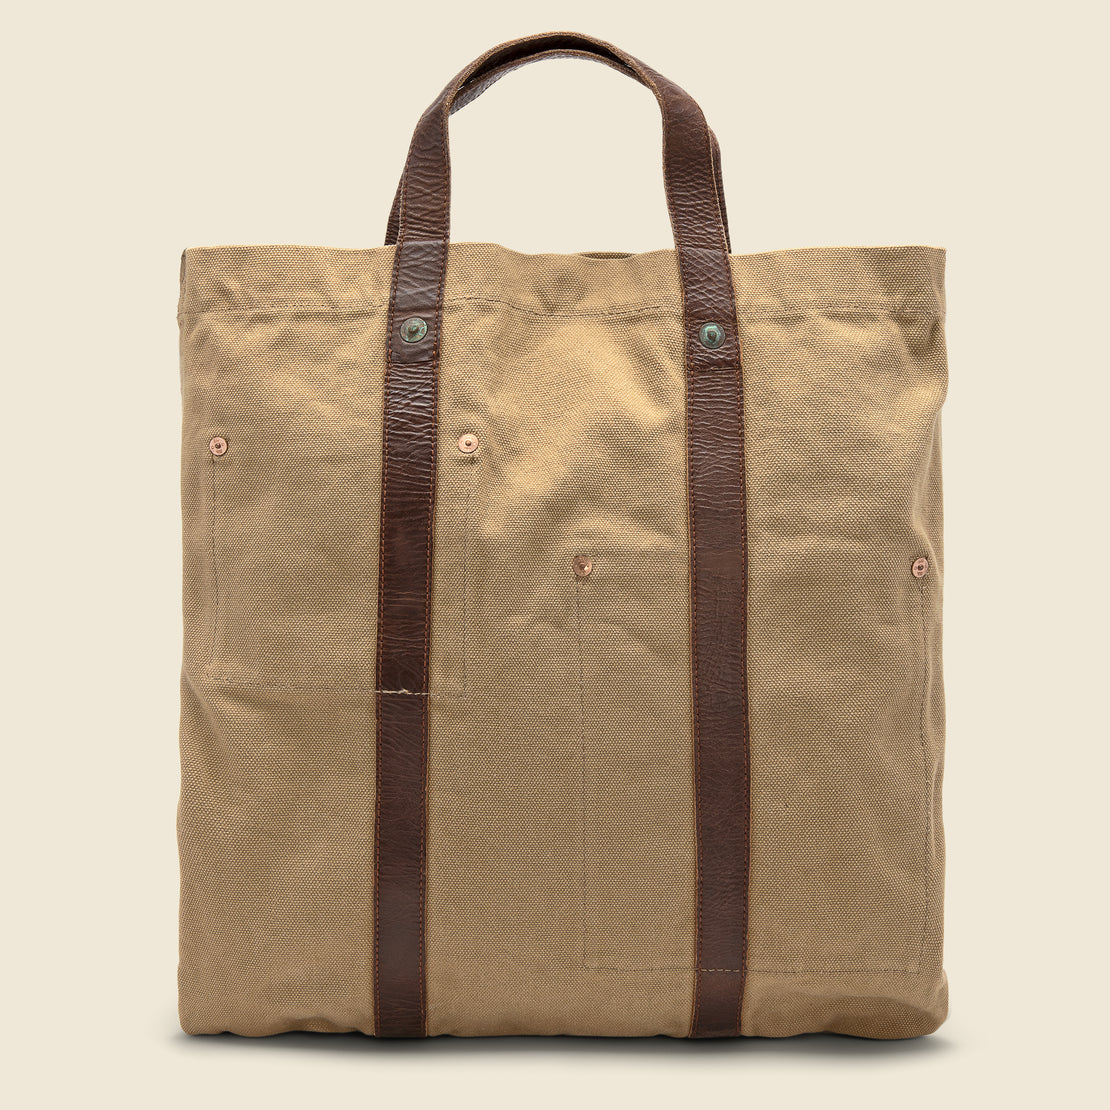 Harley Market Tote Bag - Khaki - RRL - STAG Provisions - Accessories - Bags / Luggage